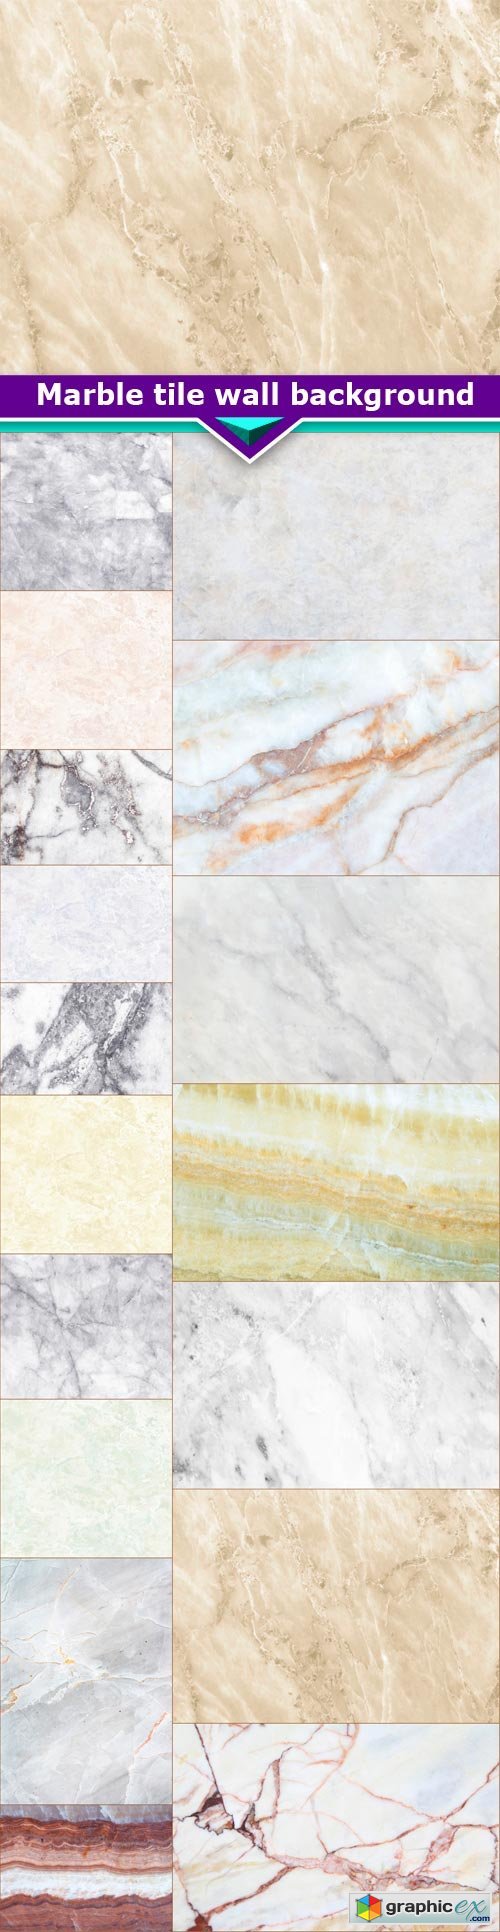 Marble tile wall background 17x JPEG